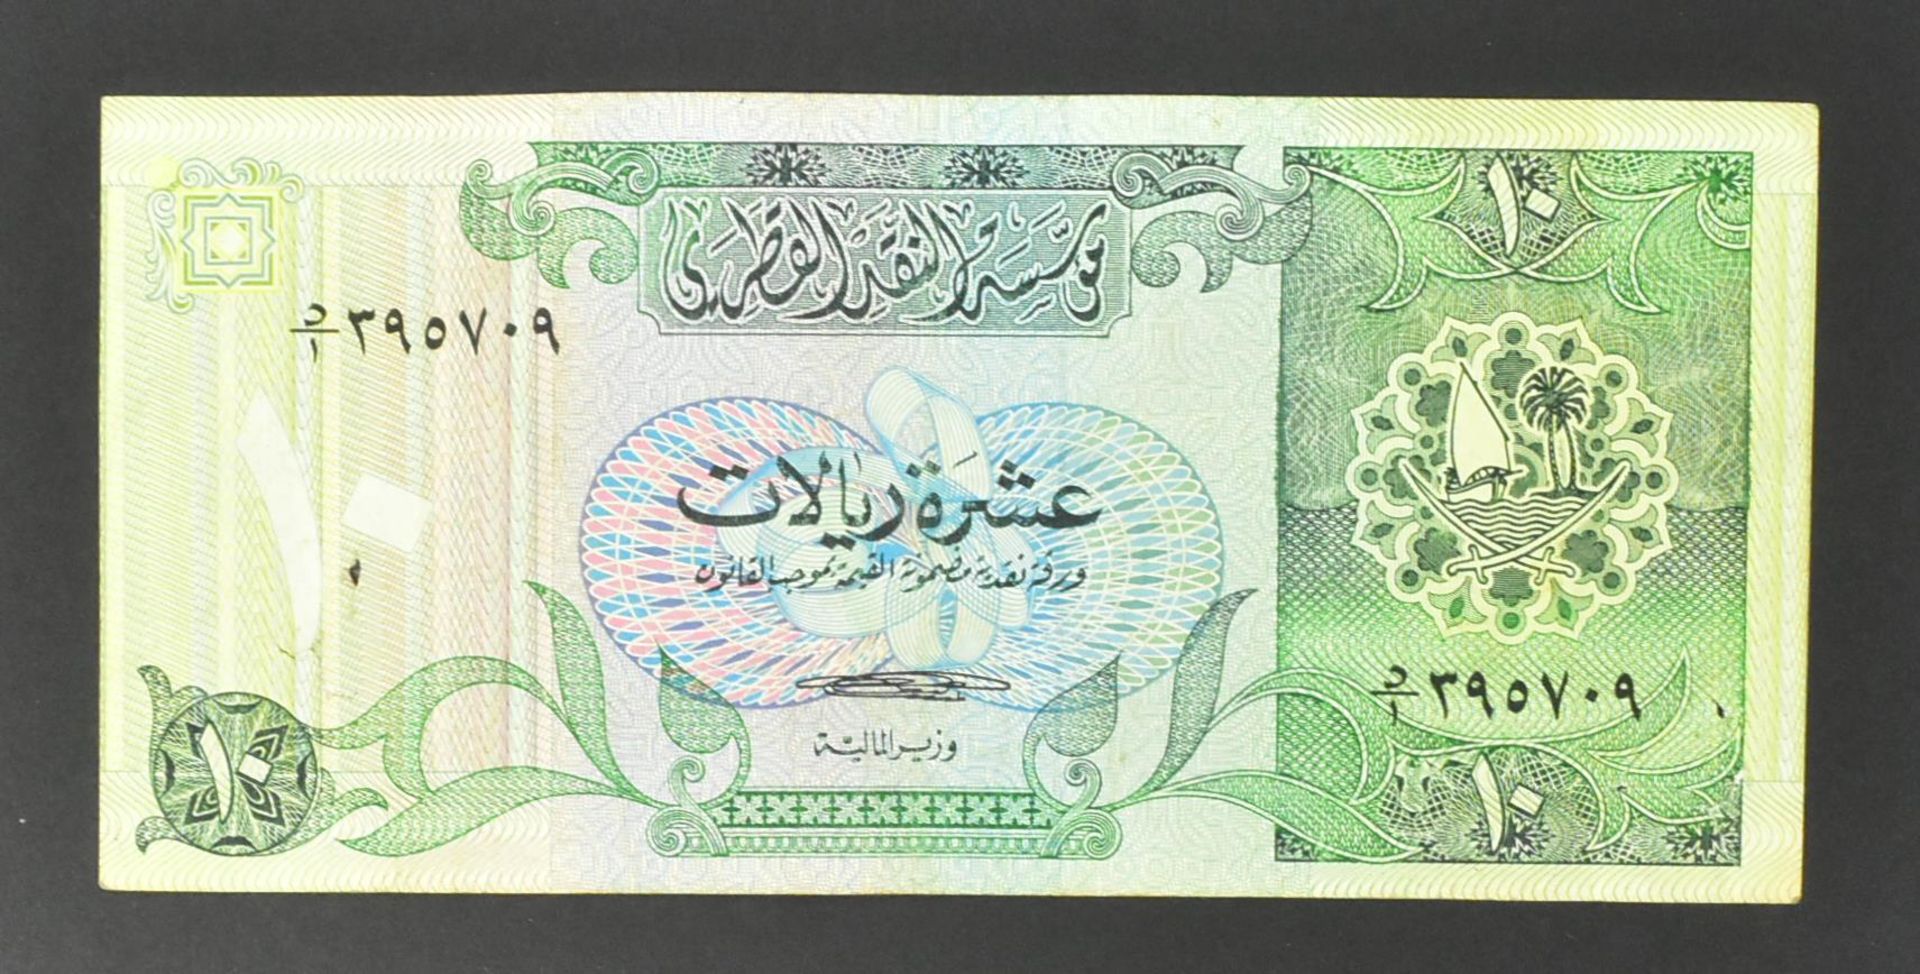 COLLECTION OF INTERNATIONAL UNCIRCULATED BANK NOTES - OMAN - Image 13 of 51